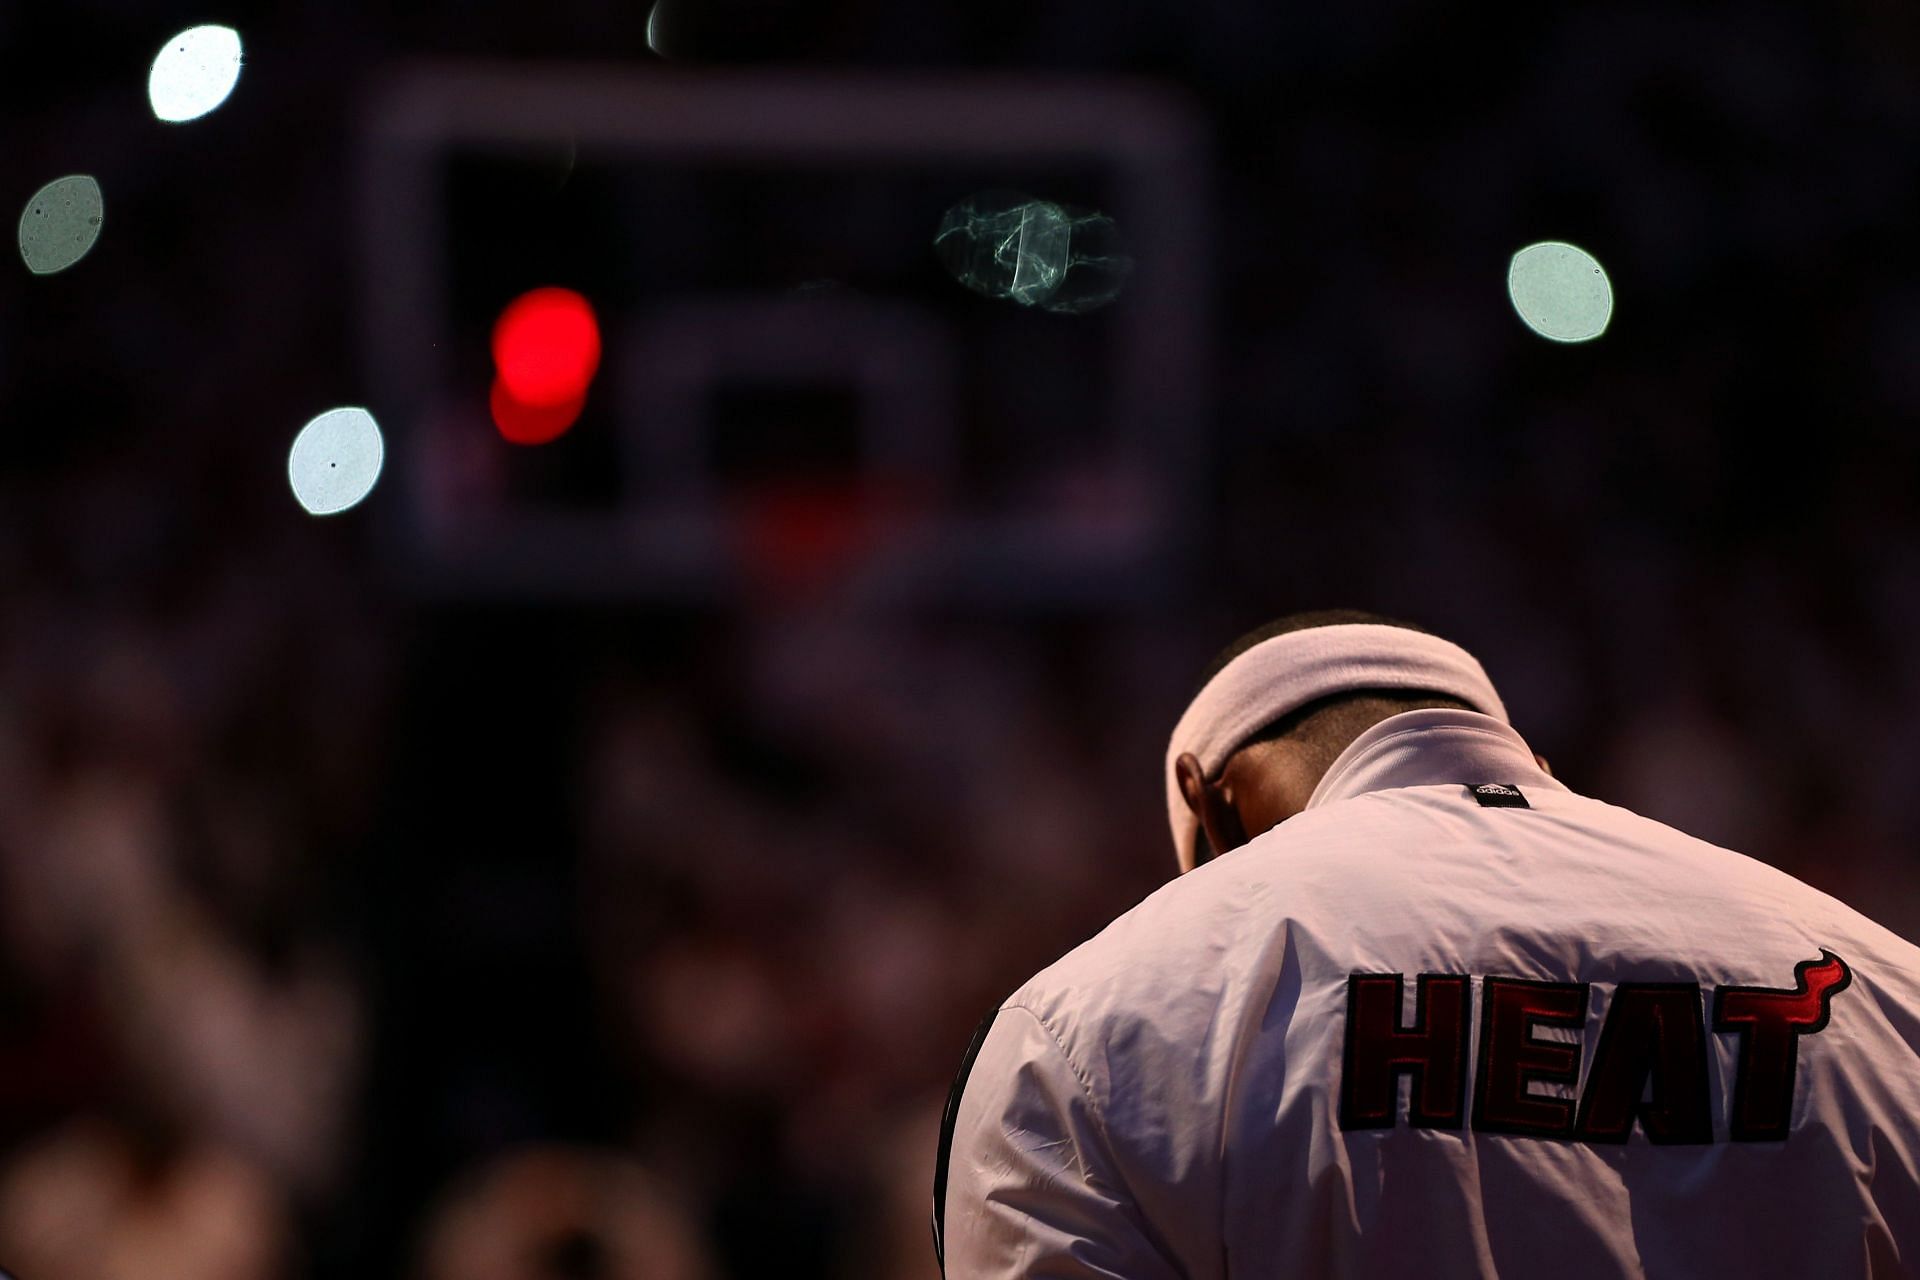 Game 7 of the 2013 NBA Finals at AmericanAirlines Arena on June 20, 2013, in Miami, Florida.